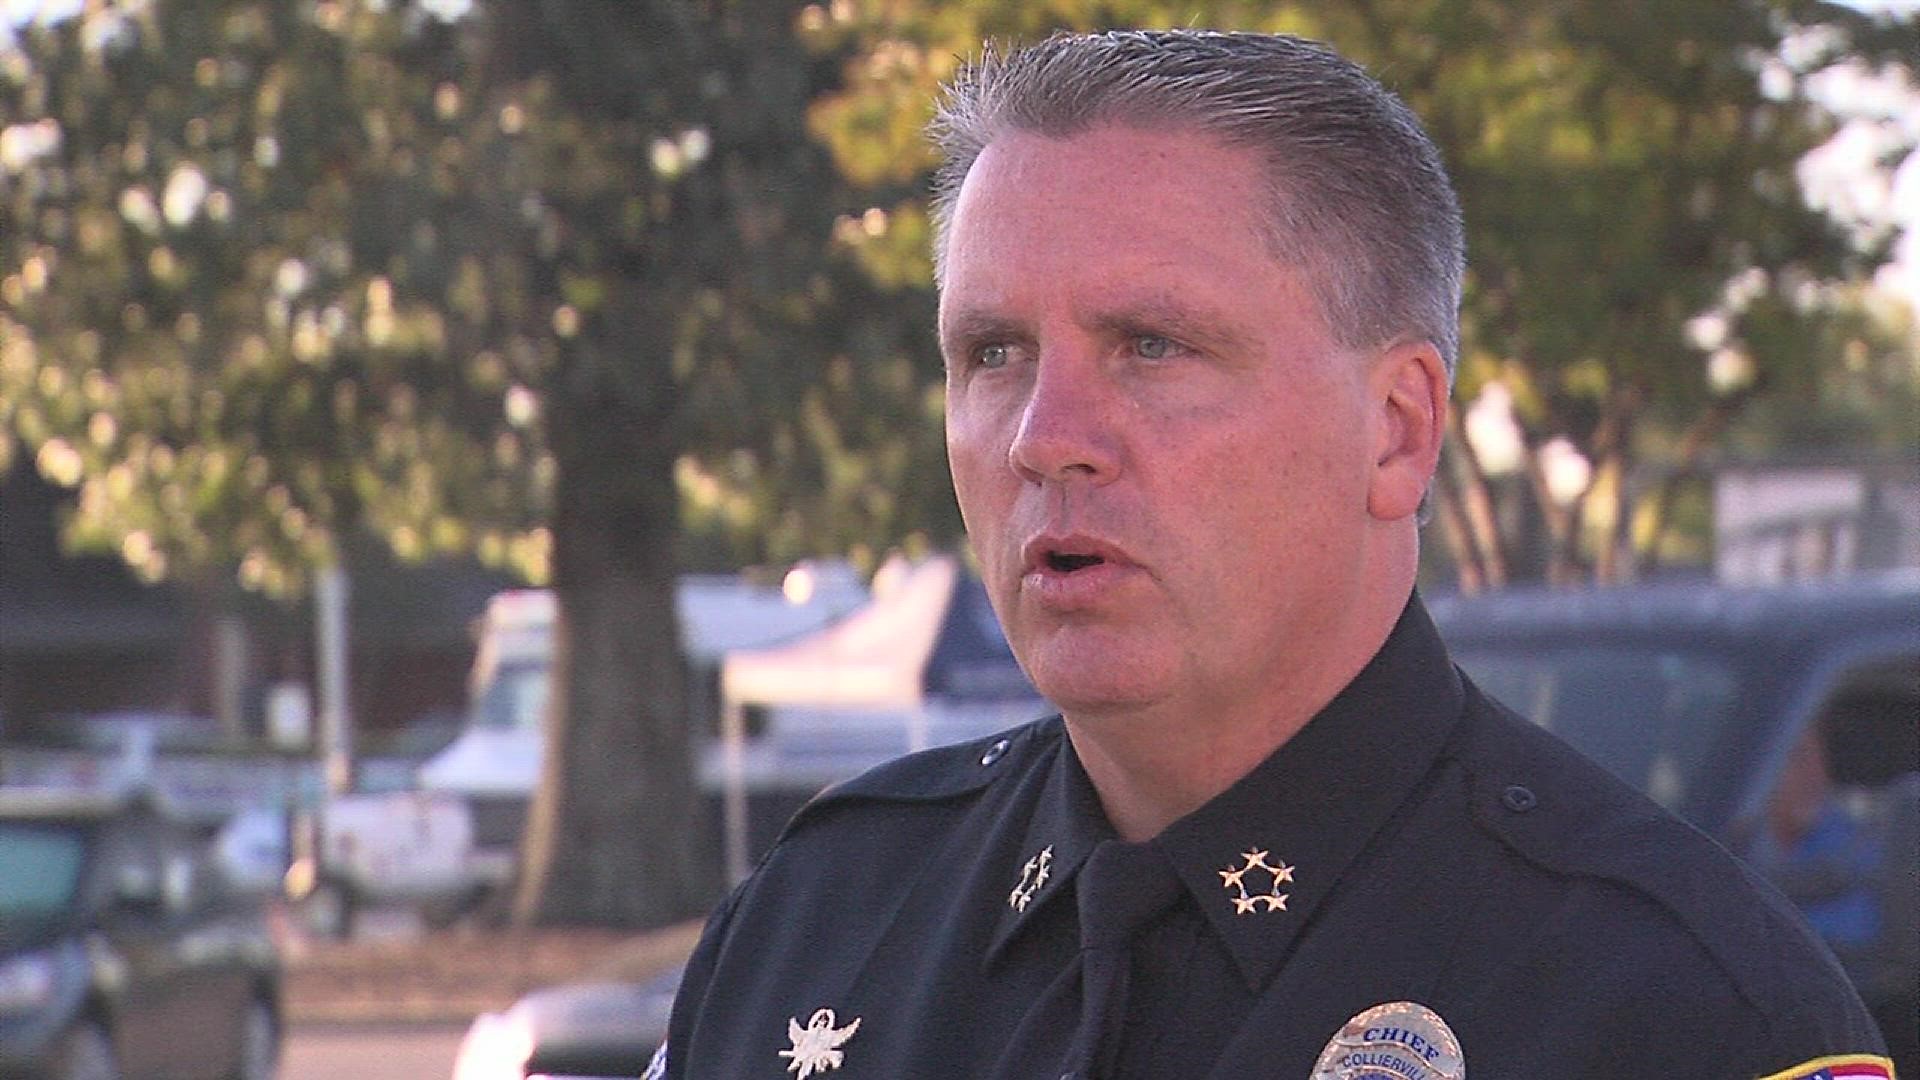 Collierville Police Chief Dale Lane spoke Friday morning after Thursday's deadly shooting at a Kroger store.